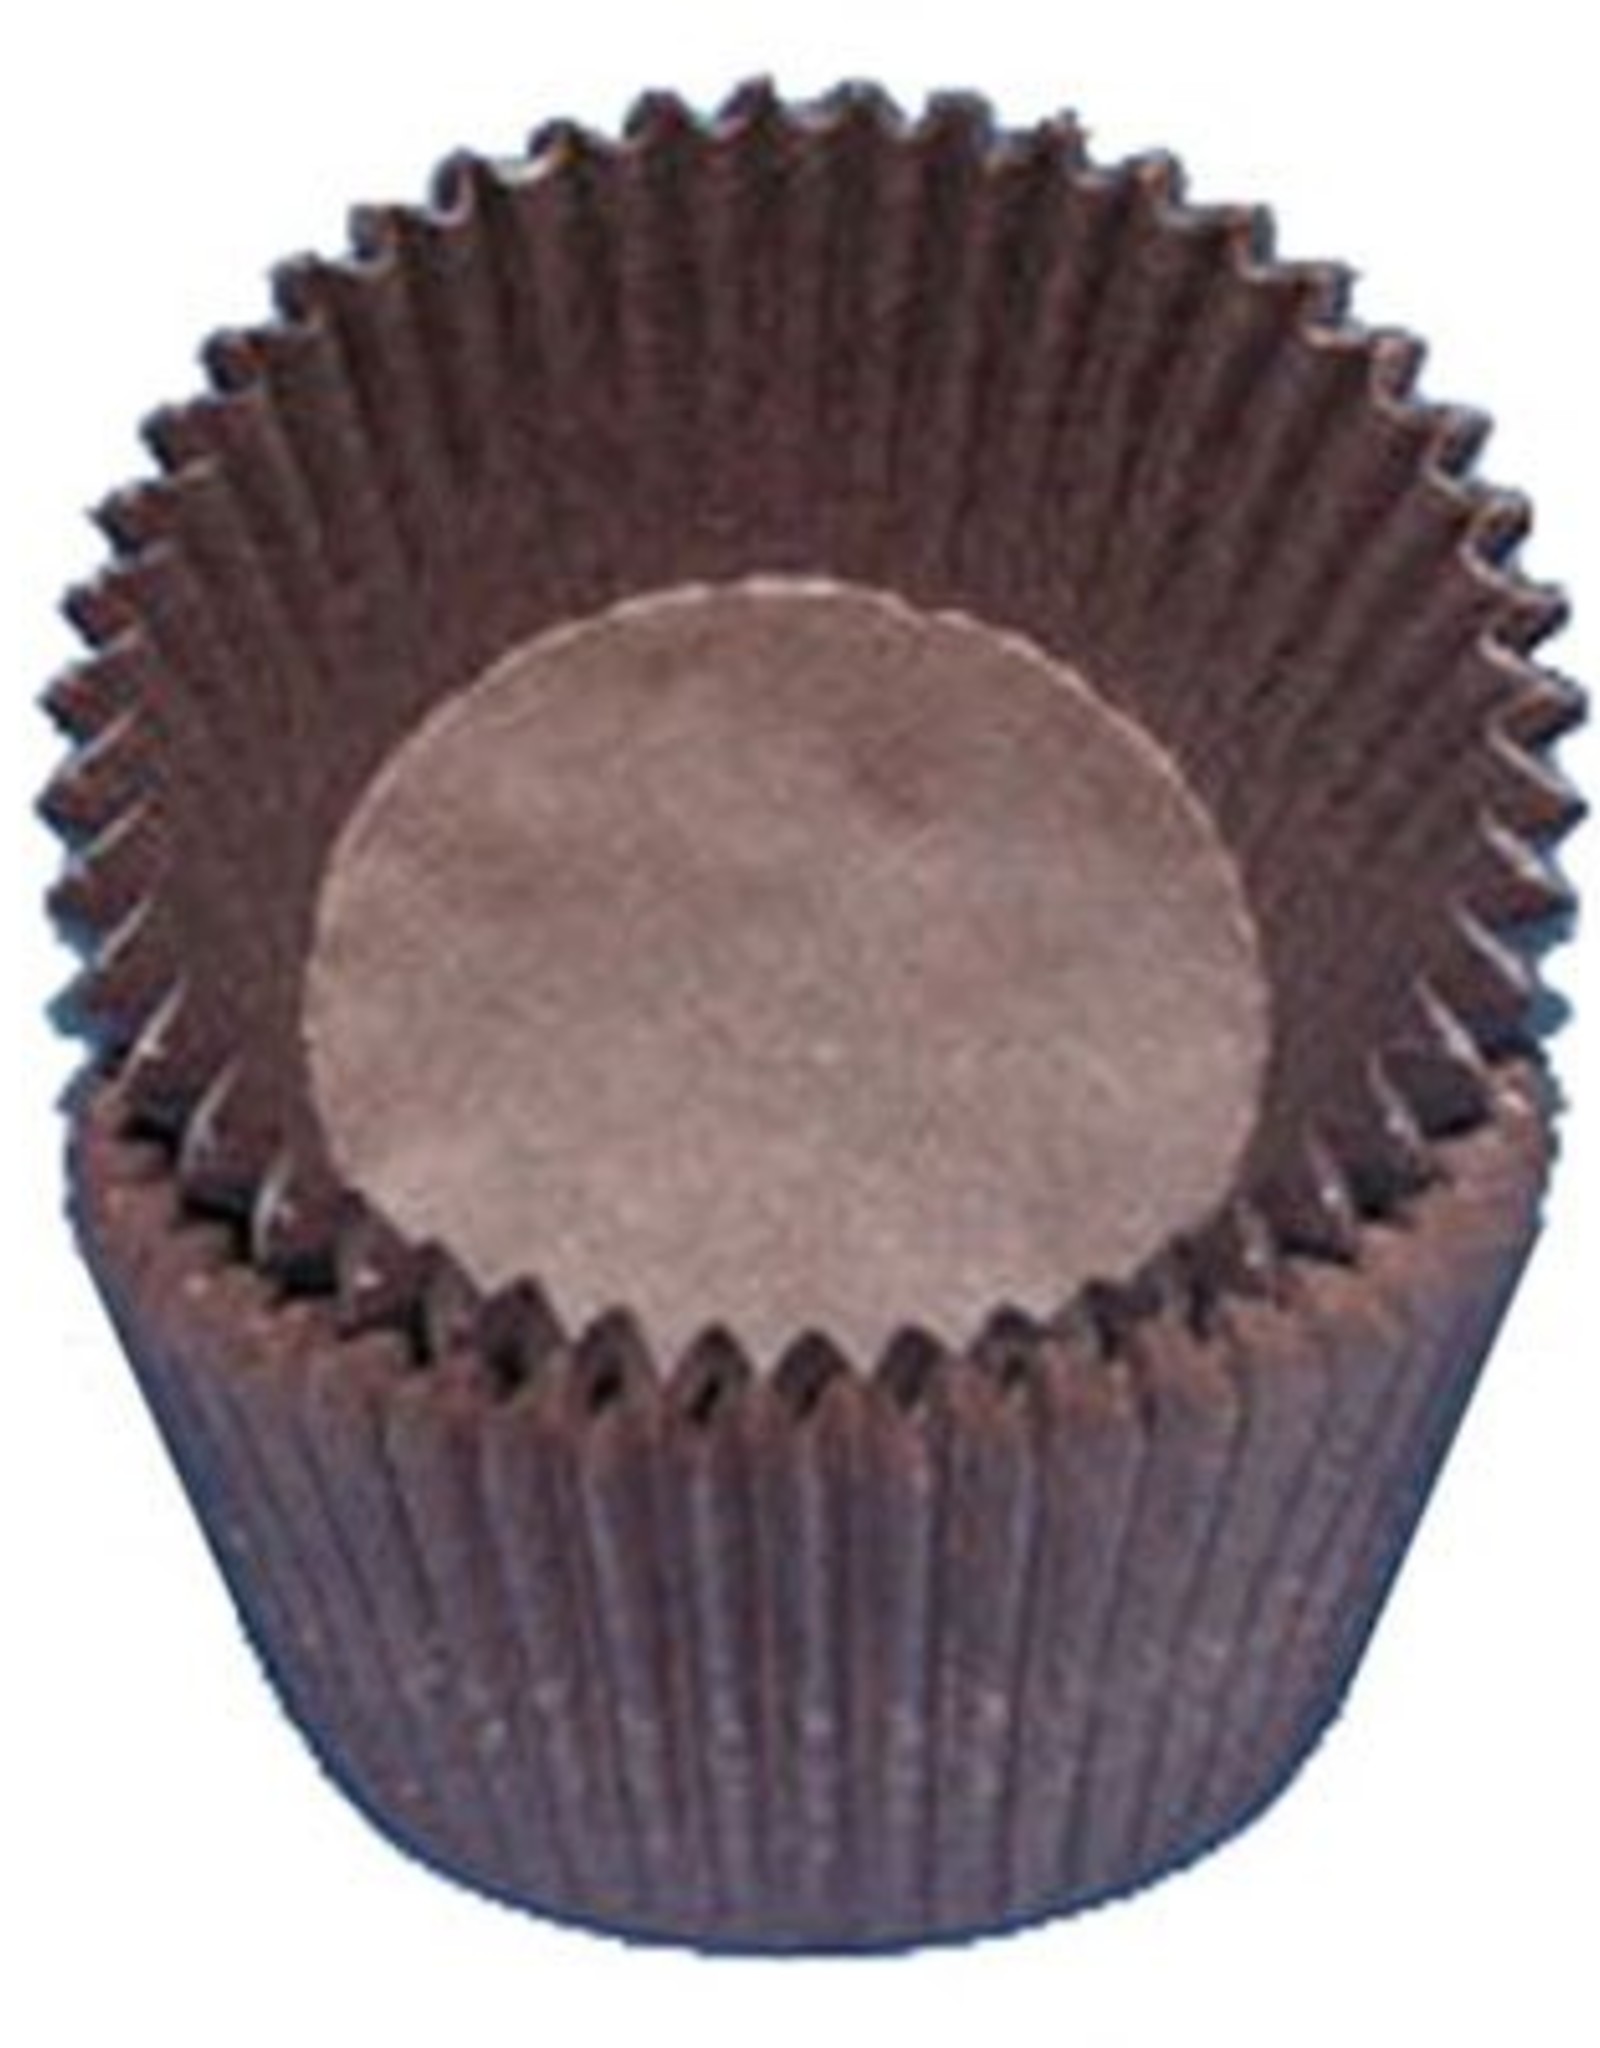 Brown Baking Cups (30-40 count)